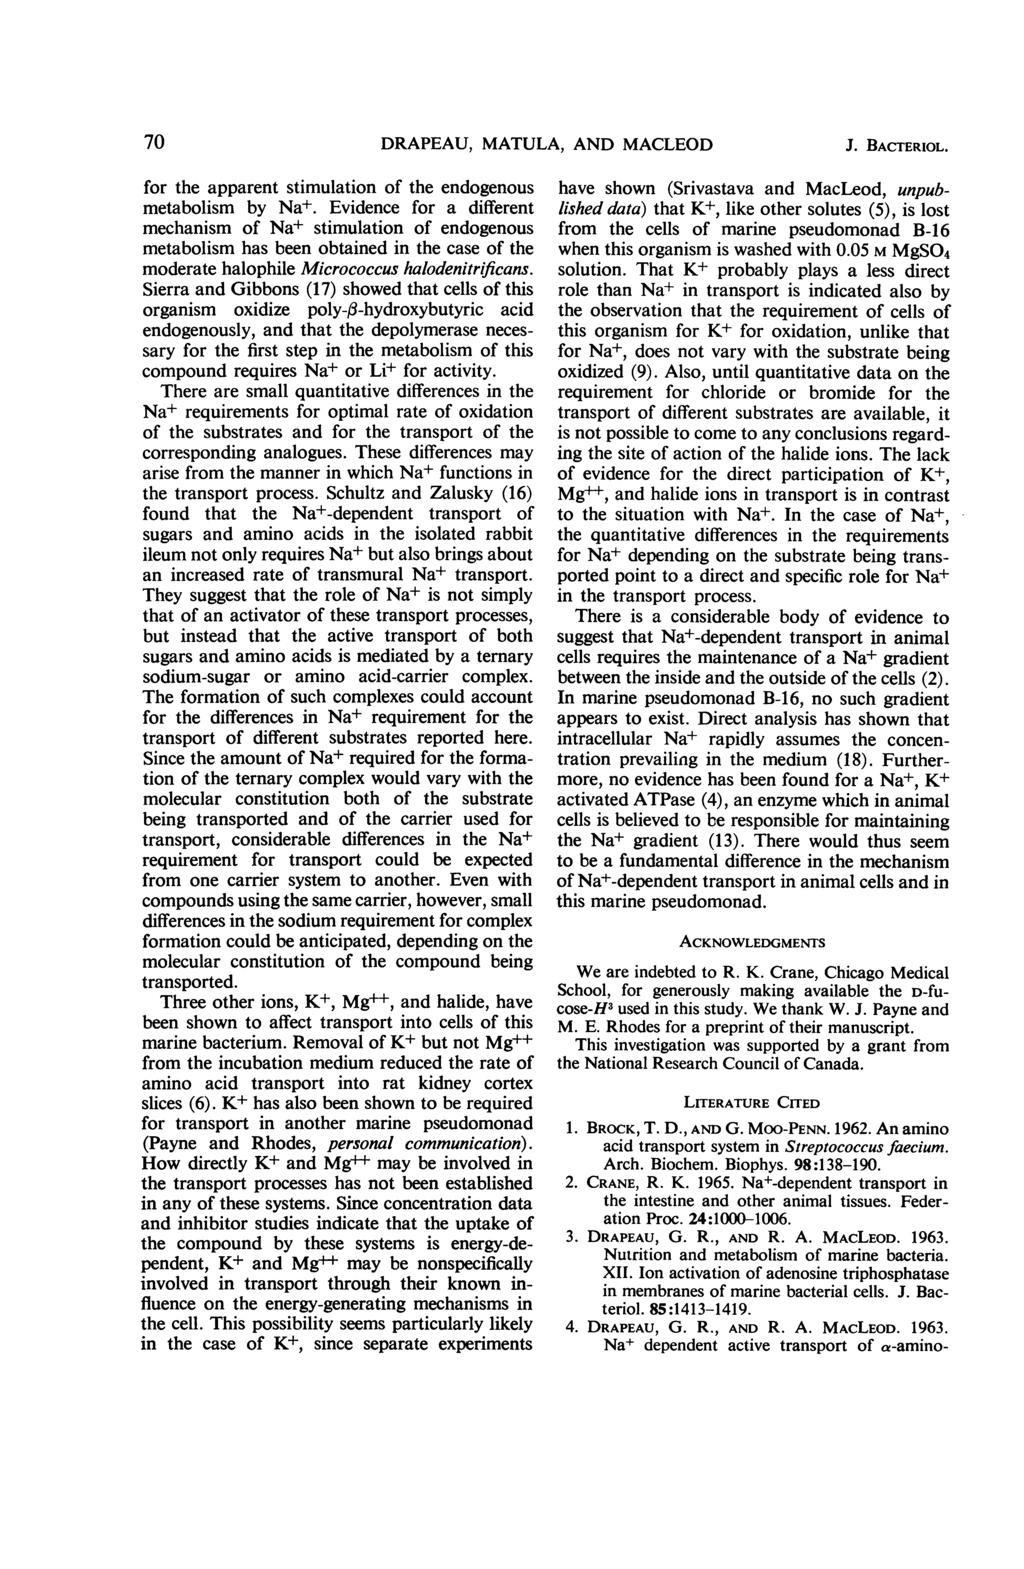 70 DRAPEAU, MATULA, AND MACLEOD J. BACTERIOL. for the apparent stimulation of the endogenous metabolism by Nat.